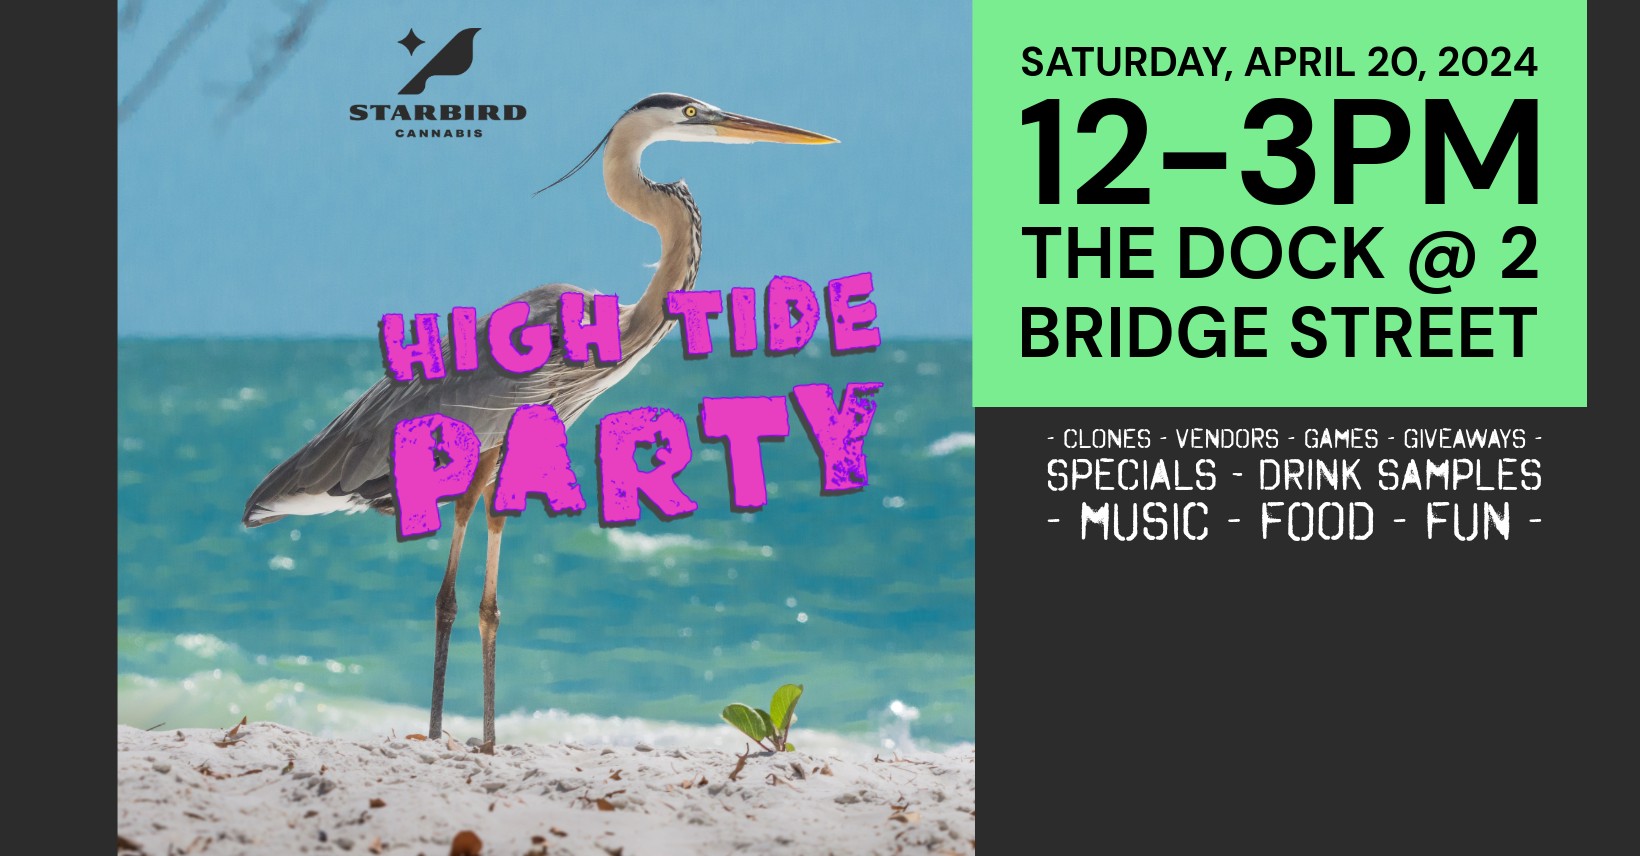 Join us for Starbird Cannabis' High Tide Party, set for Saturday, April 20, 2024. Our promotional poster presents a serene image of a heron relaxing on the beach. Don't miss out!